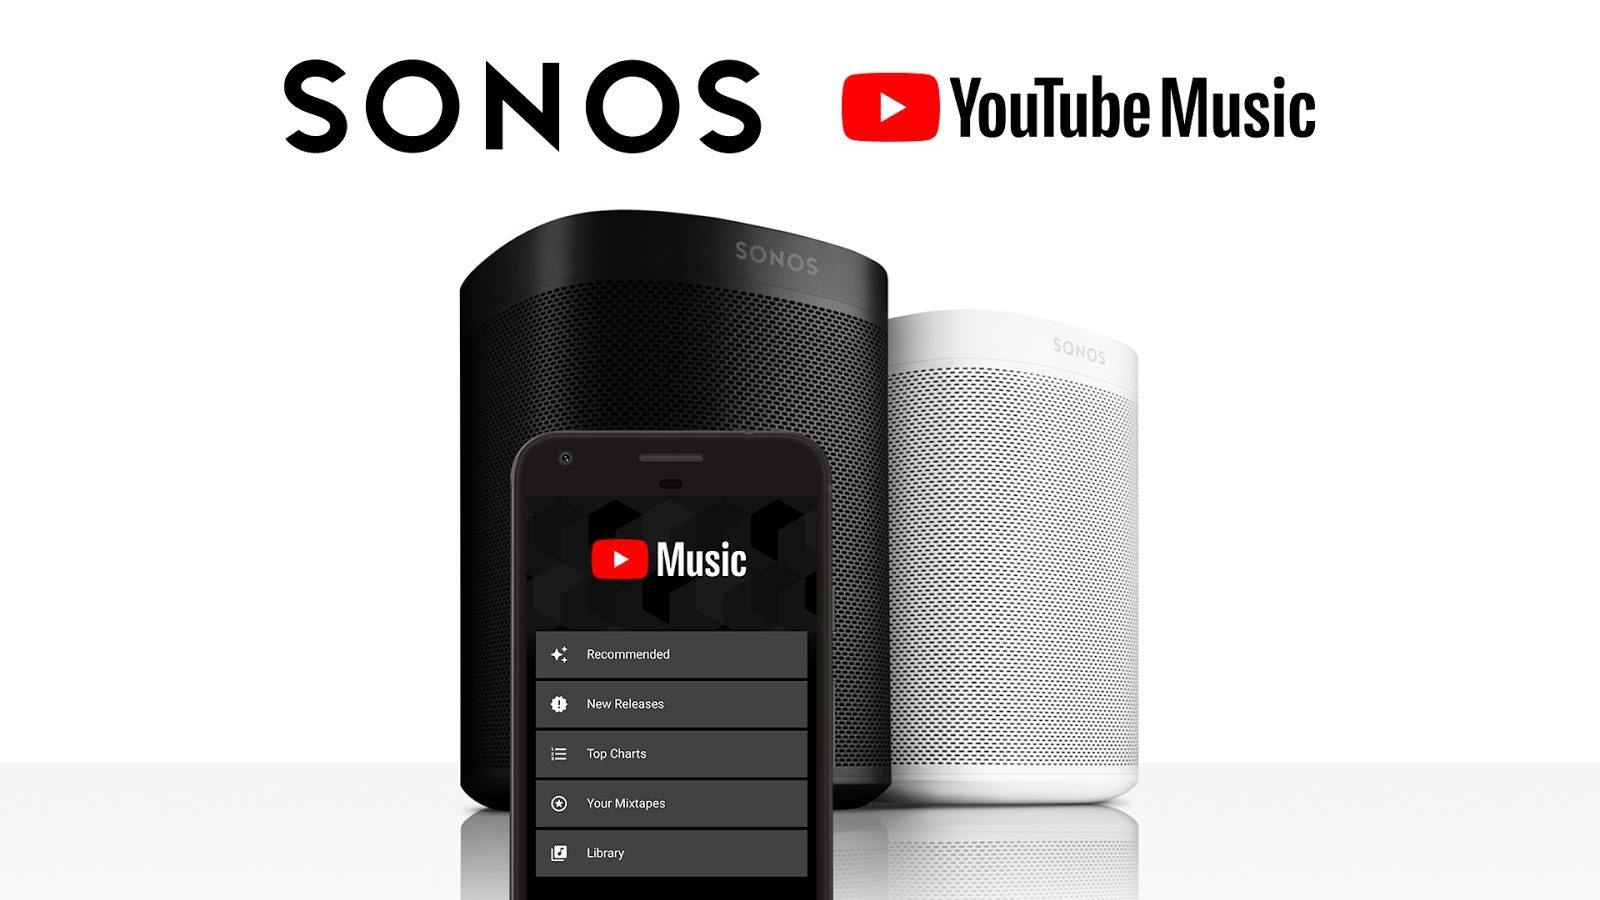 How to Music on Sonos